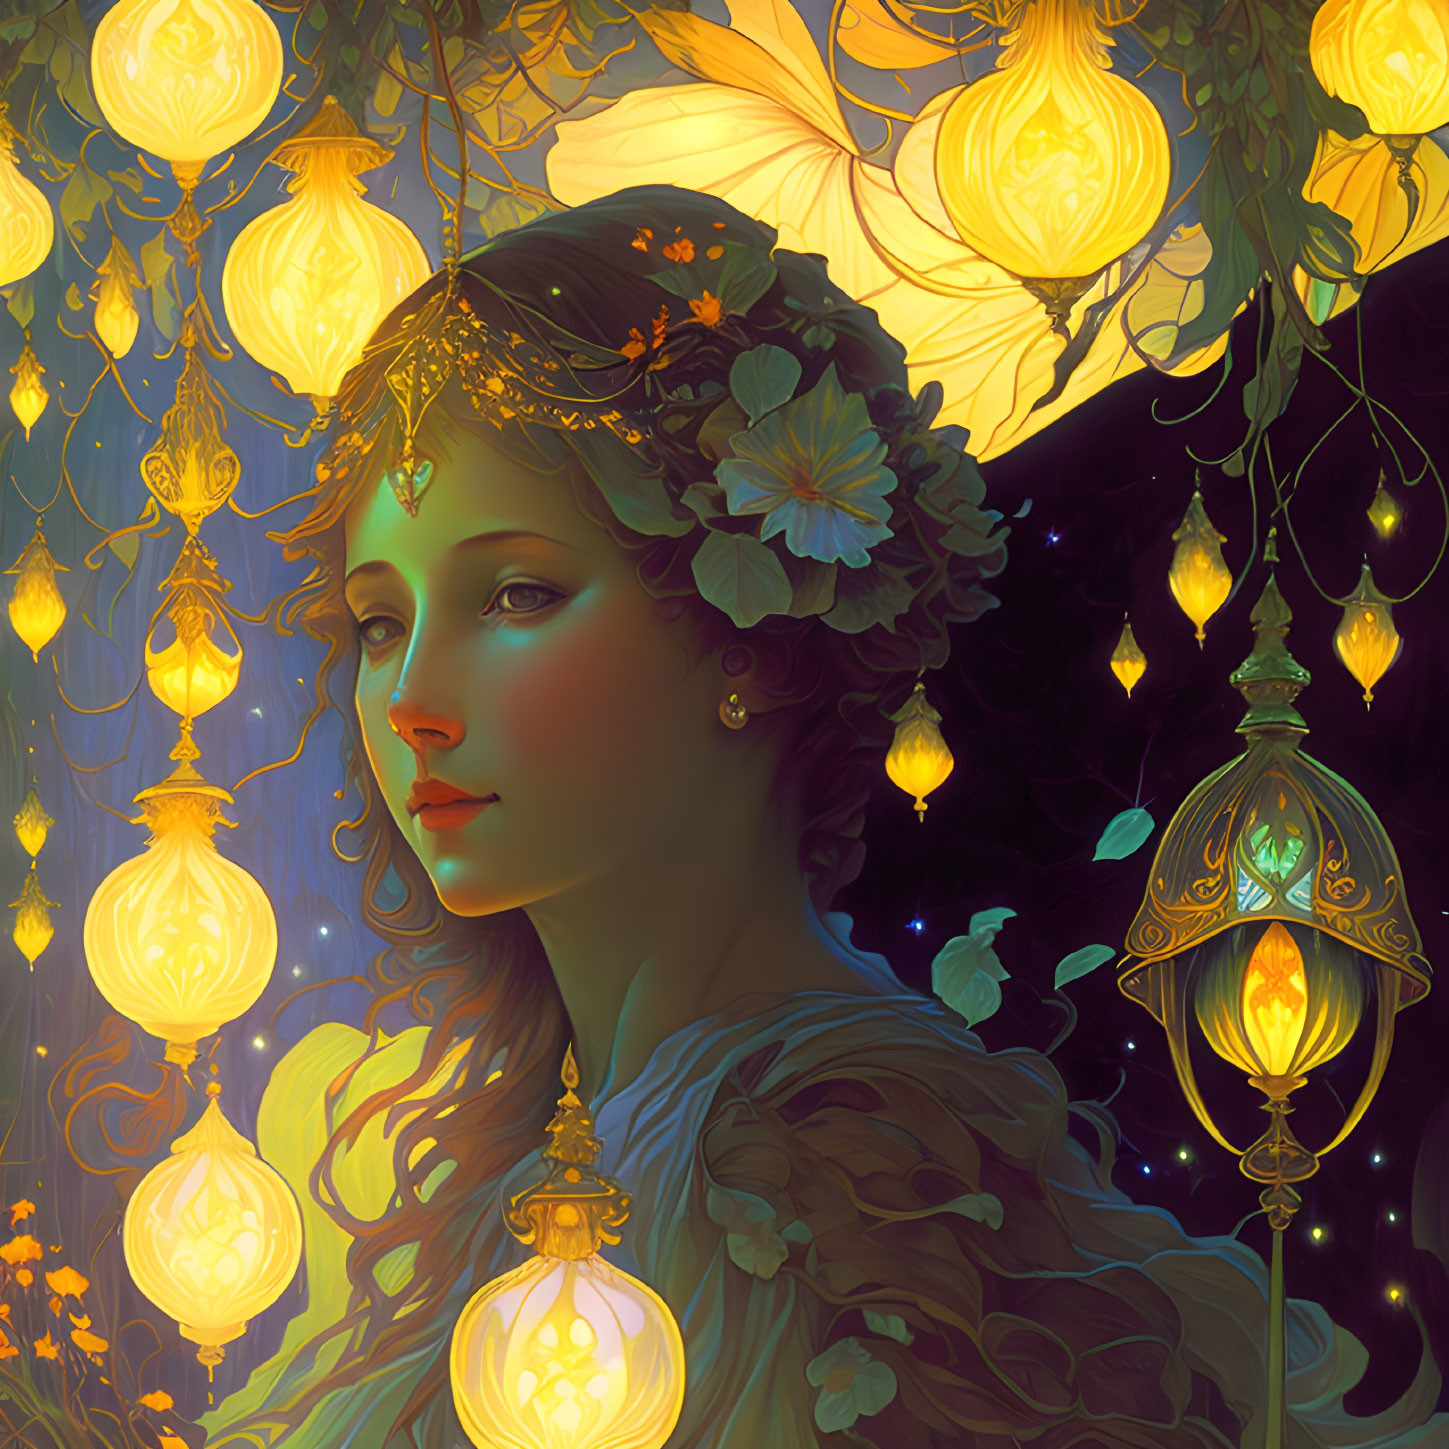 Illustrated woman with floral crown and lanterns in dark, starry scene